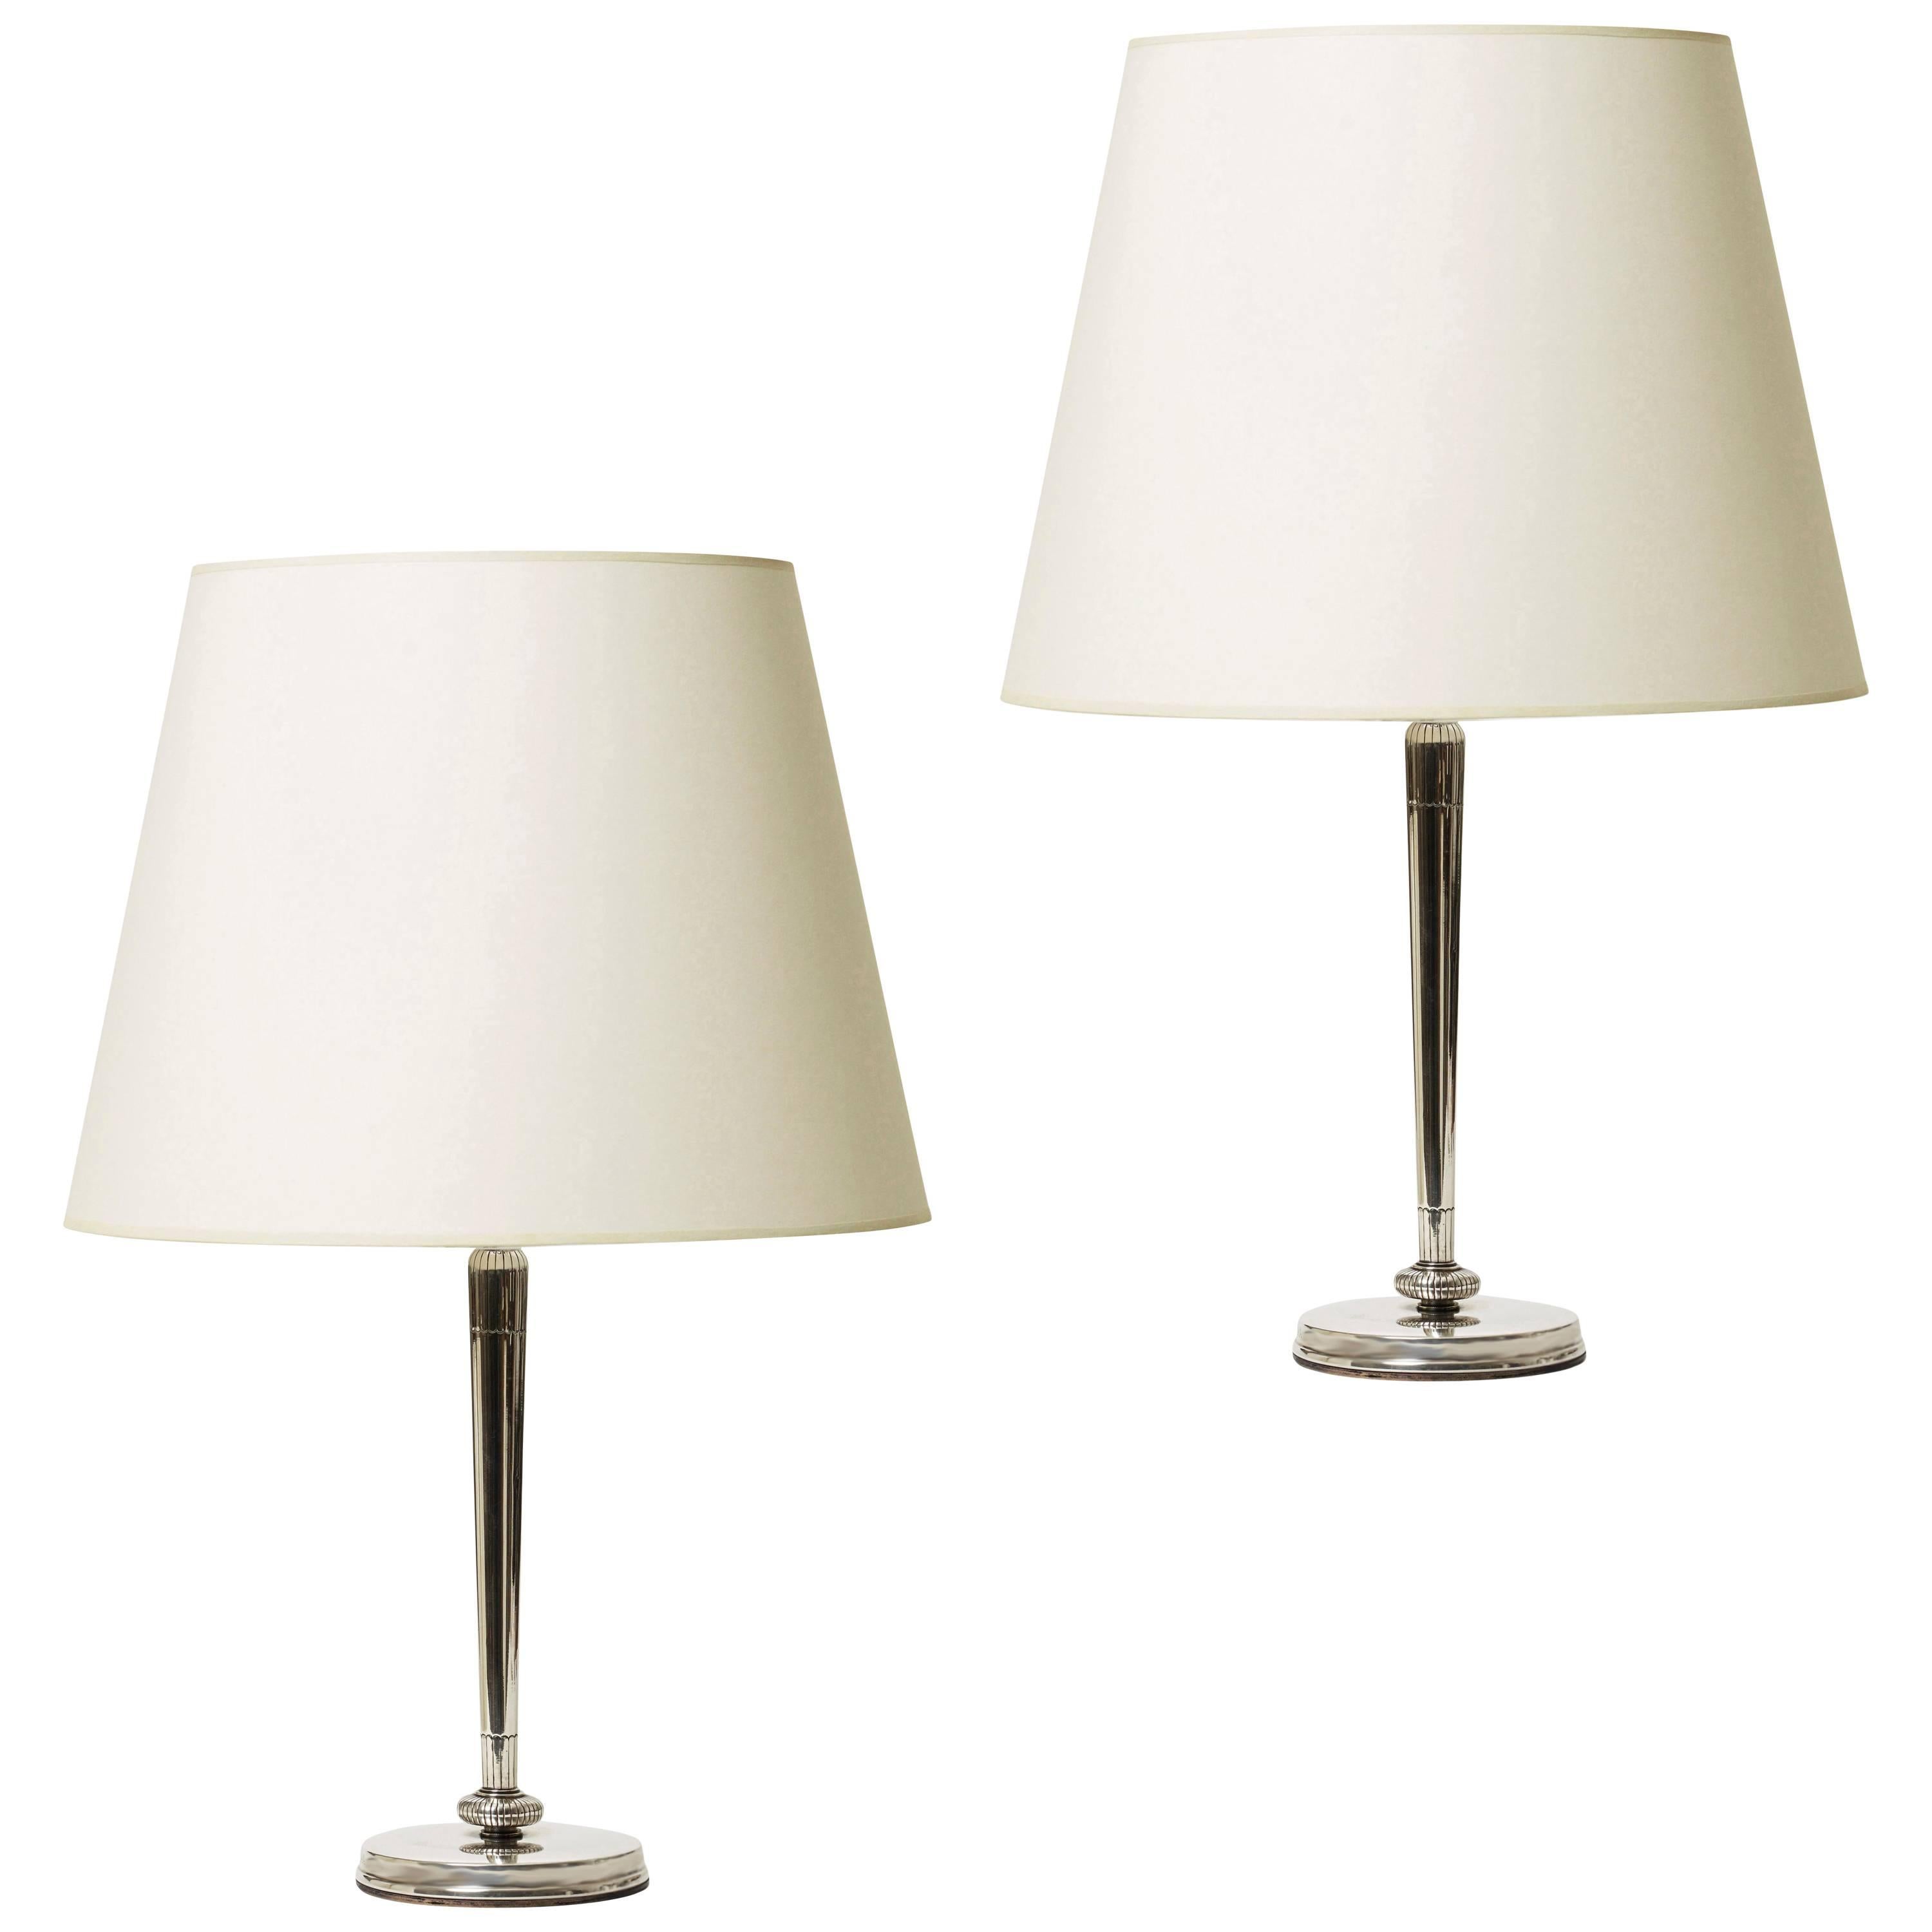 Pair of Tailored Art Deco Lamps in Silver by Carl Gustav Hallberg For Sale